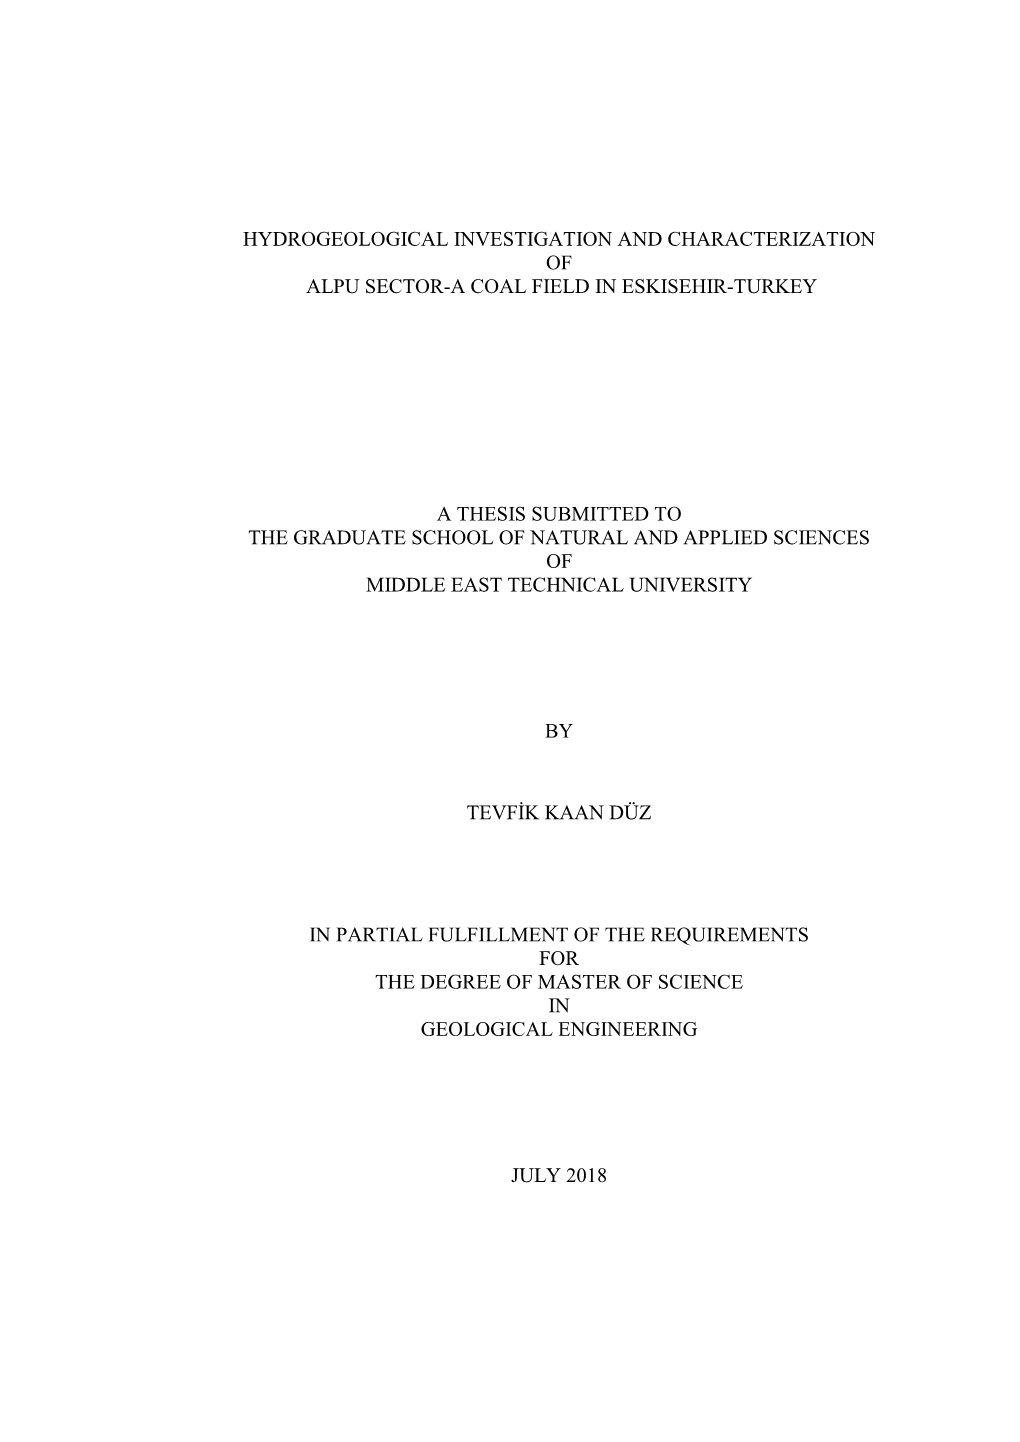 Hydrogeological Investigation and Characterization of Alpu Sector-A Coal Field in Eskisehir-Turkey a Thesis Submitted to the Gr